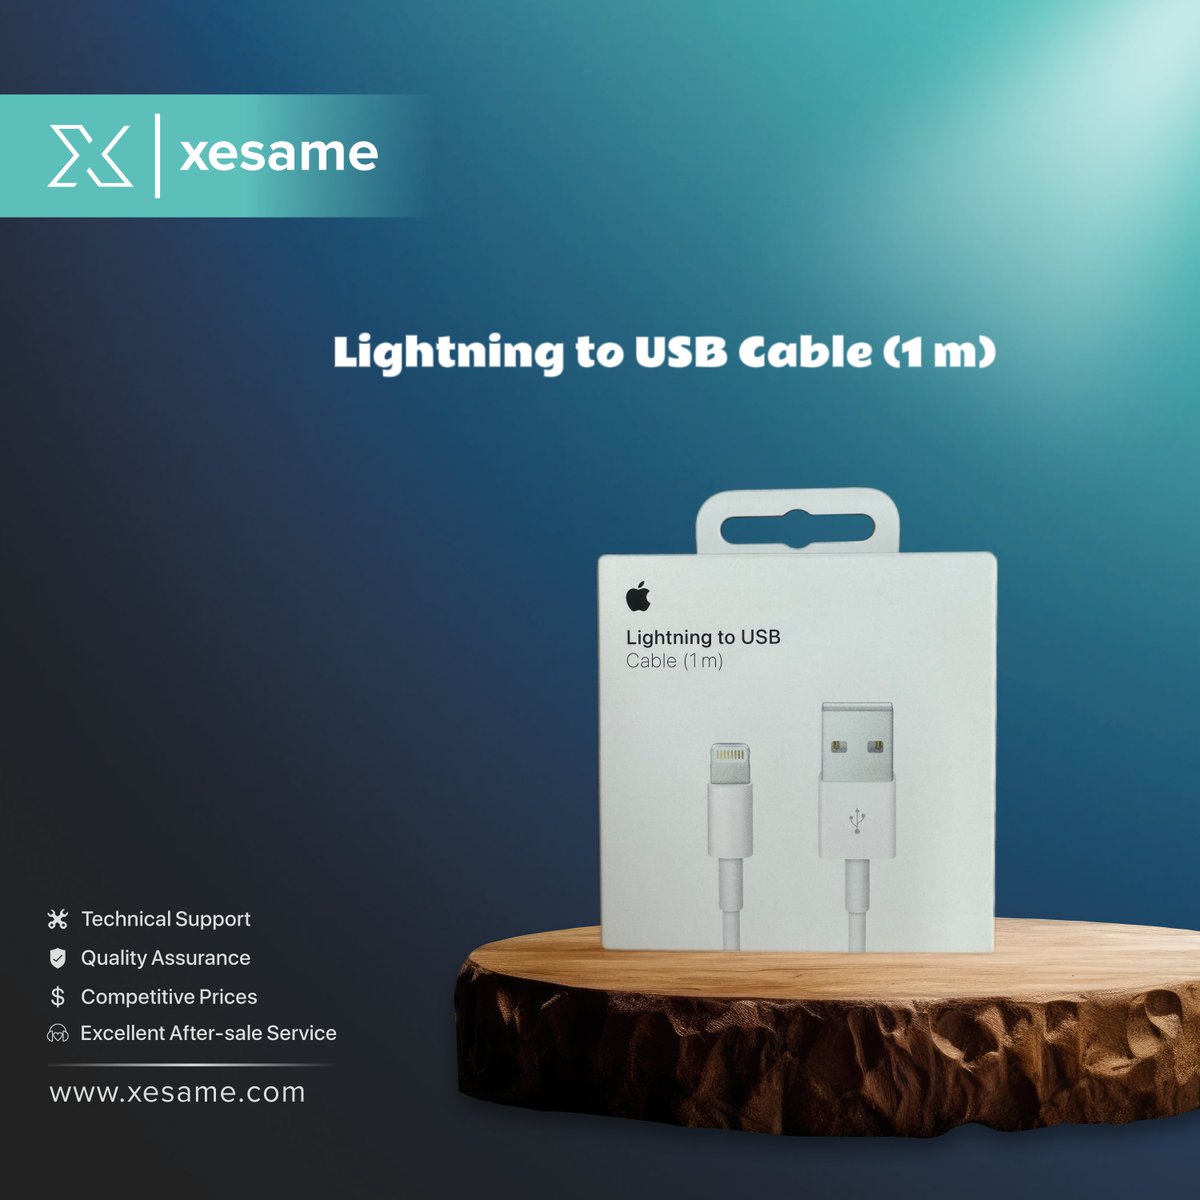 New Arrival! ⚡ Apple Lightning to USB Cable (1 m) MUQW3ZE

Email: info@xesame.com
Website: xesame.com

#apple #appleparts #appleaccessories #spareparts #applechargingcable #applecable #applecharger #iphonechargingcable #iphonecable #iphoneaccessories #iphoneparts